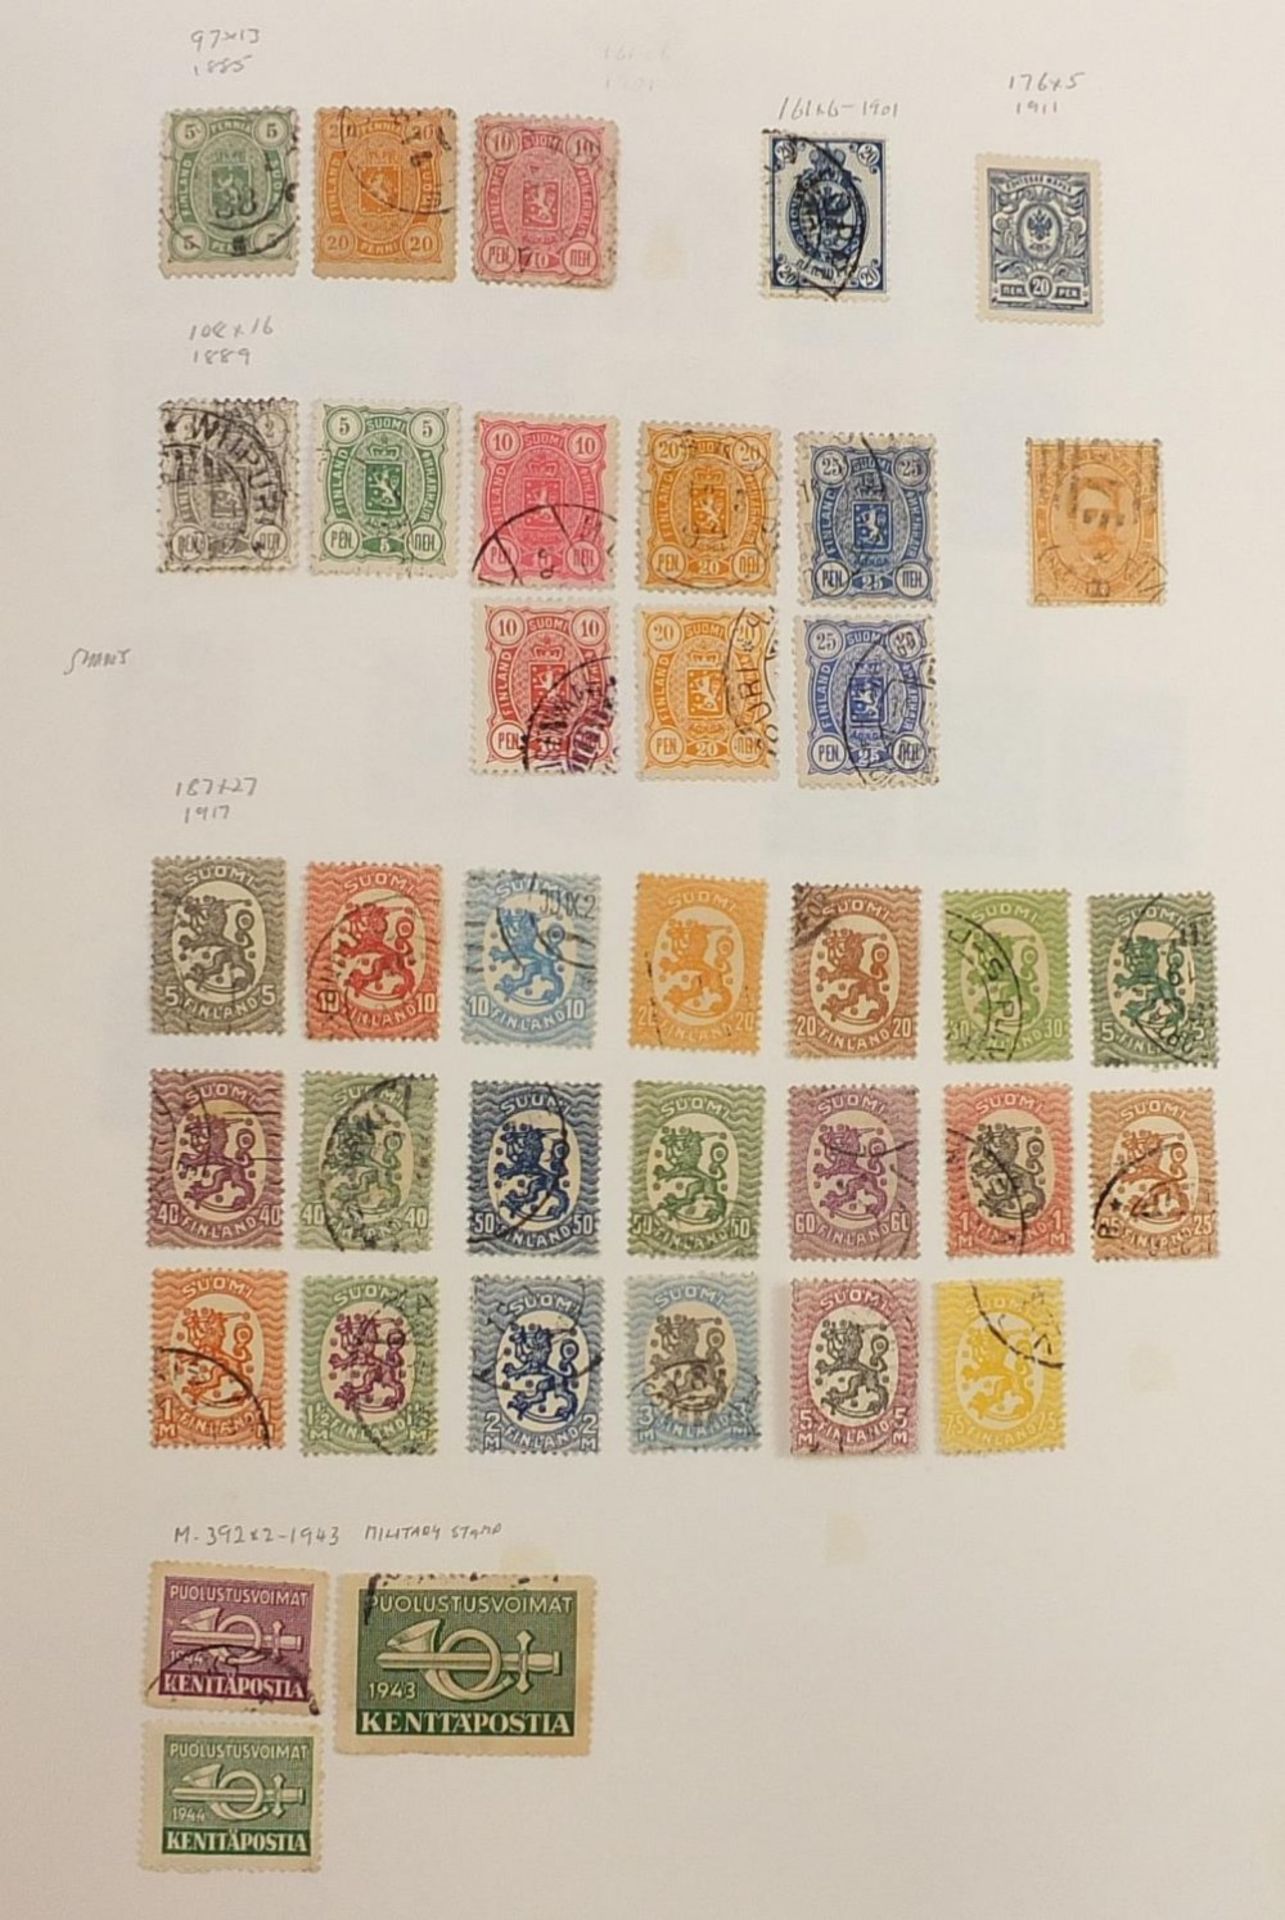 Extensive collection of antique and later world stamps arranged in albums including Brazil, - Image 33 of 52